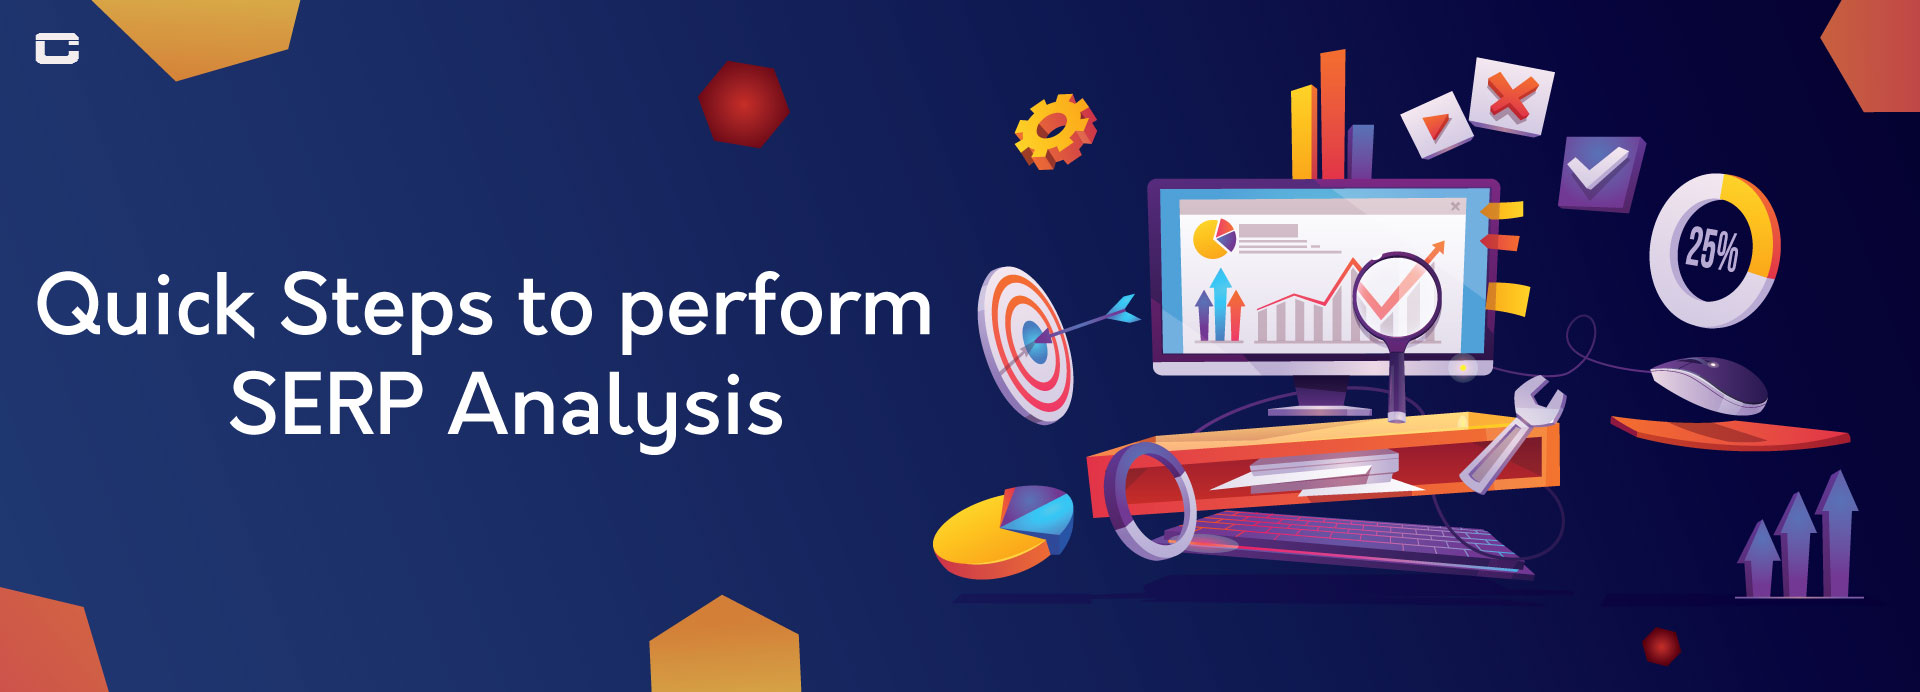 Quick Steps to Perform SERP Analysis